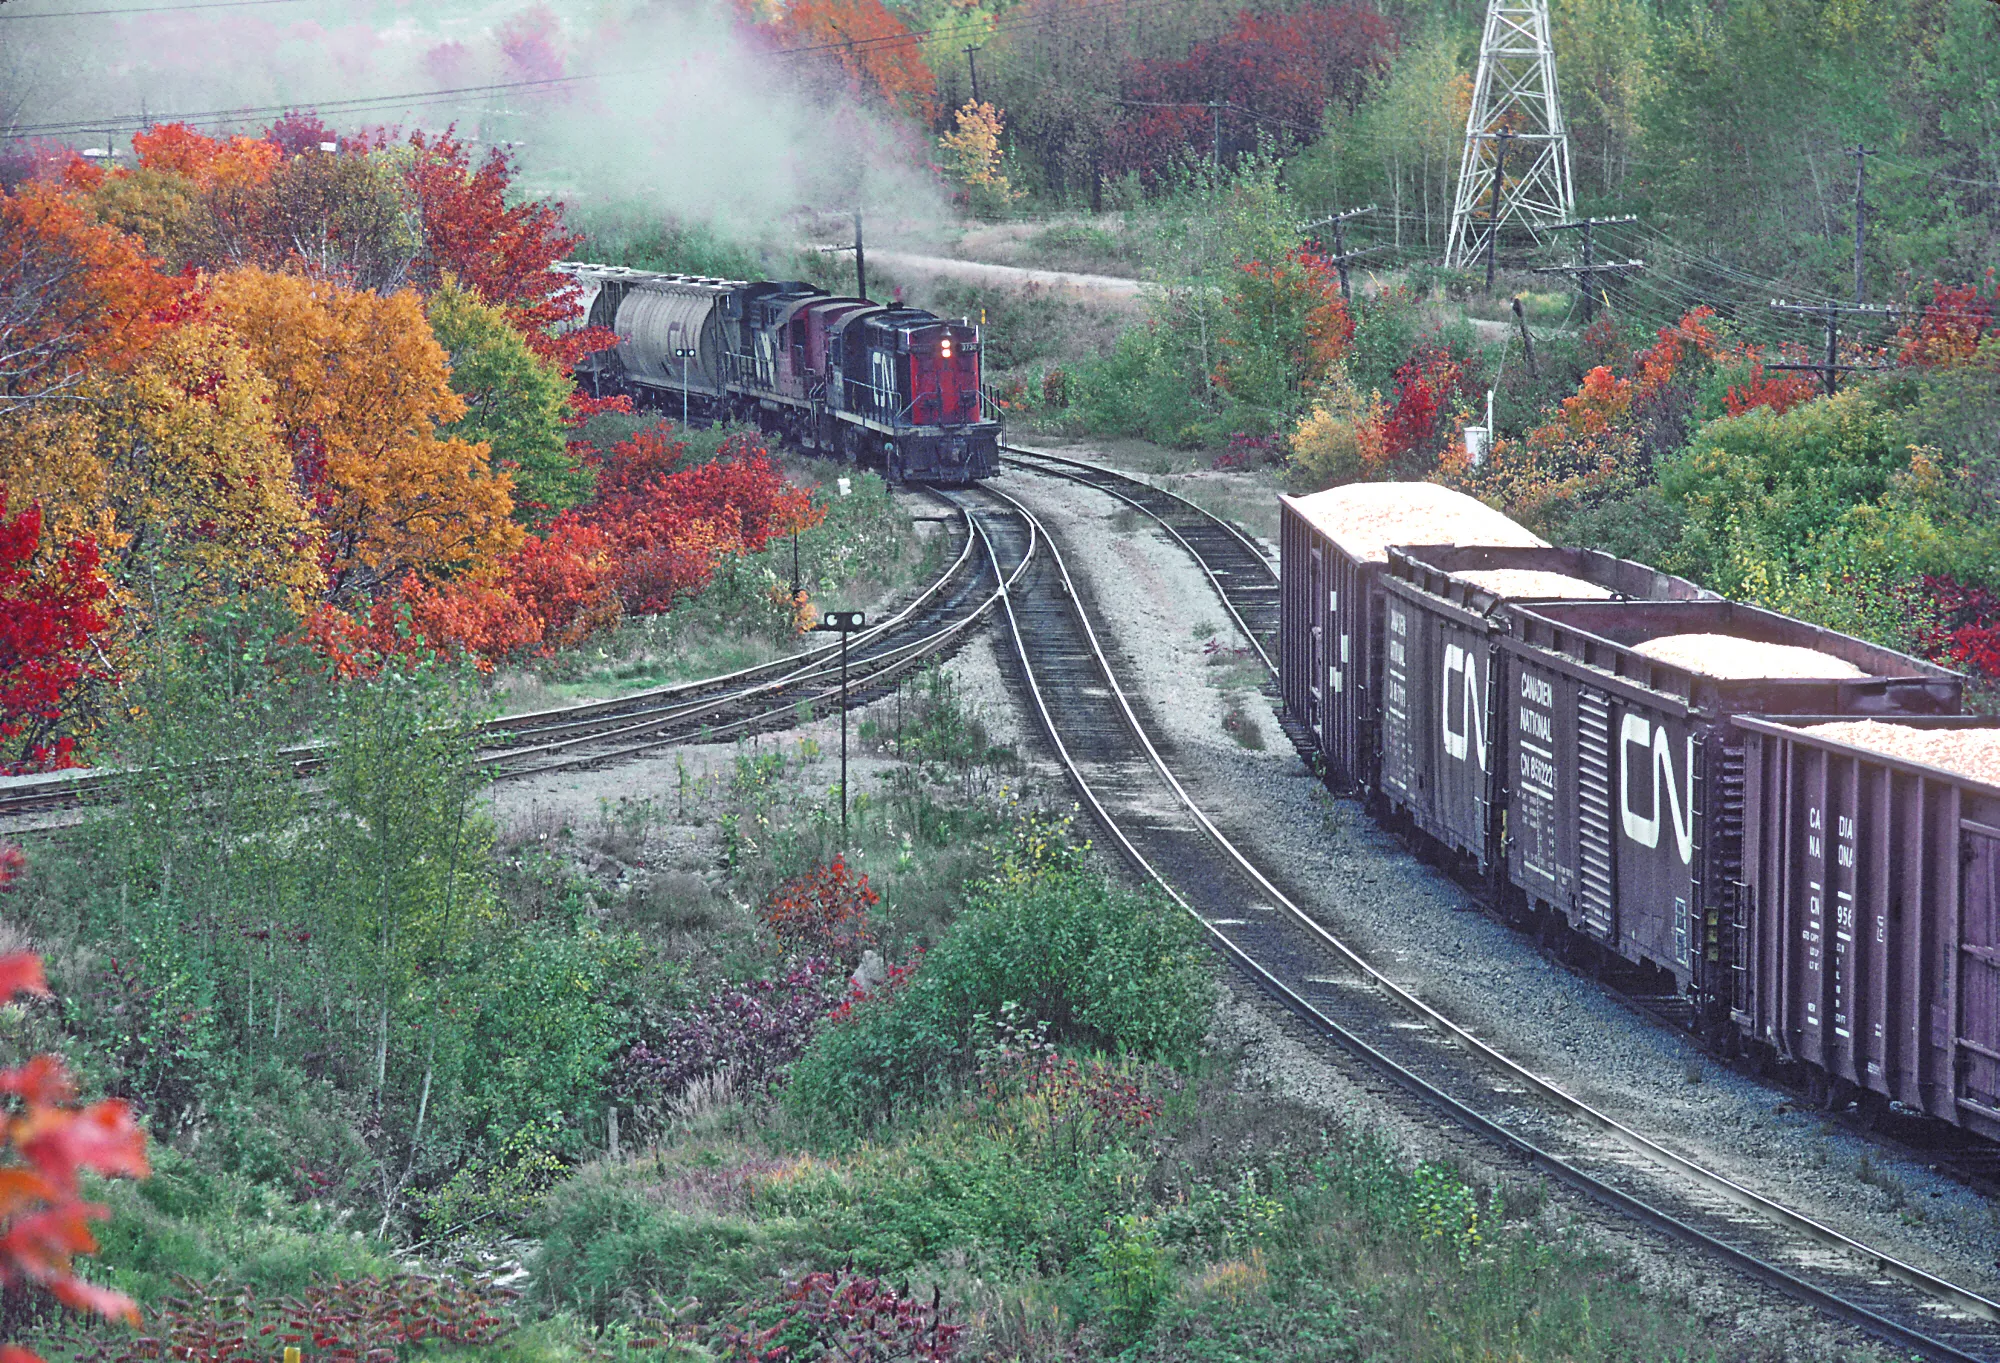 Photo showing: This is CN RS-3 3730 coming at you near Grand-Mère, Quebec in October 1981. The following comment is by kgmontreal, a member of Train Orders:

"Those 40' boxcars converted to woodchip cars were very common in Quebec, New Brunswick and Nova Scotia. Of course, the RS-18 units indicate that the photos were not taken in the western provinces. The train is westbound toward Shawinigan, QC from Garneau. The wye leads north to a mill in Grand Mère. The covered hoppers are for the Alcan aluminum smelter in Shawinigan. The photo was taken from the embankment at the CPR bridge to Grand-Mère over the CN mainline."